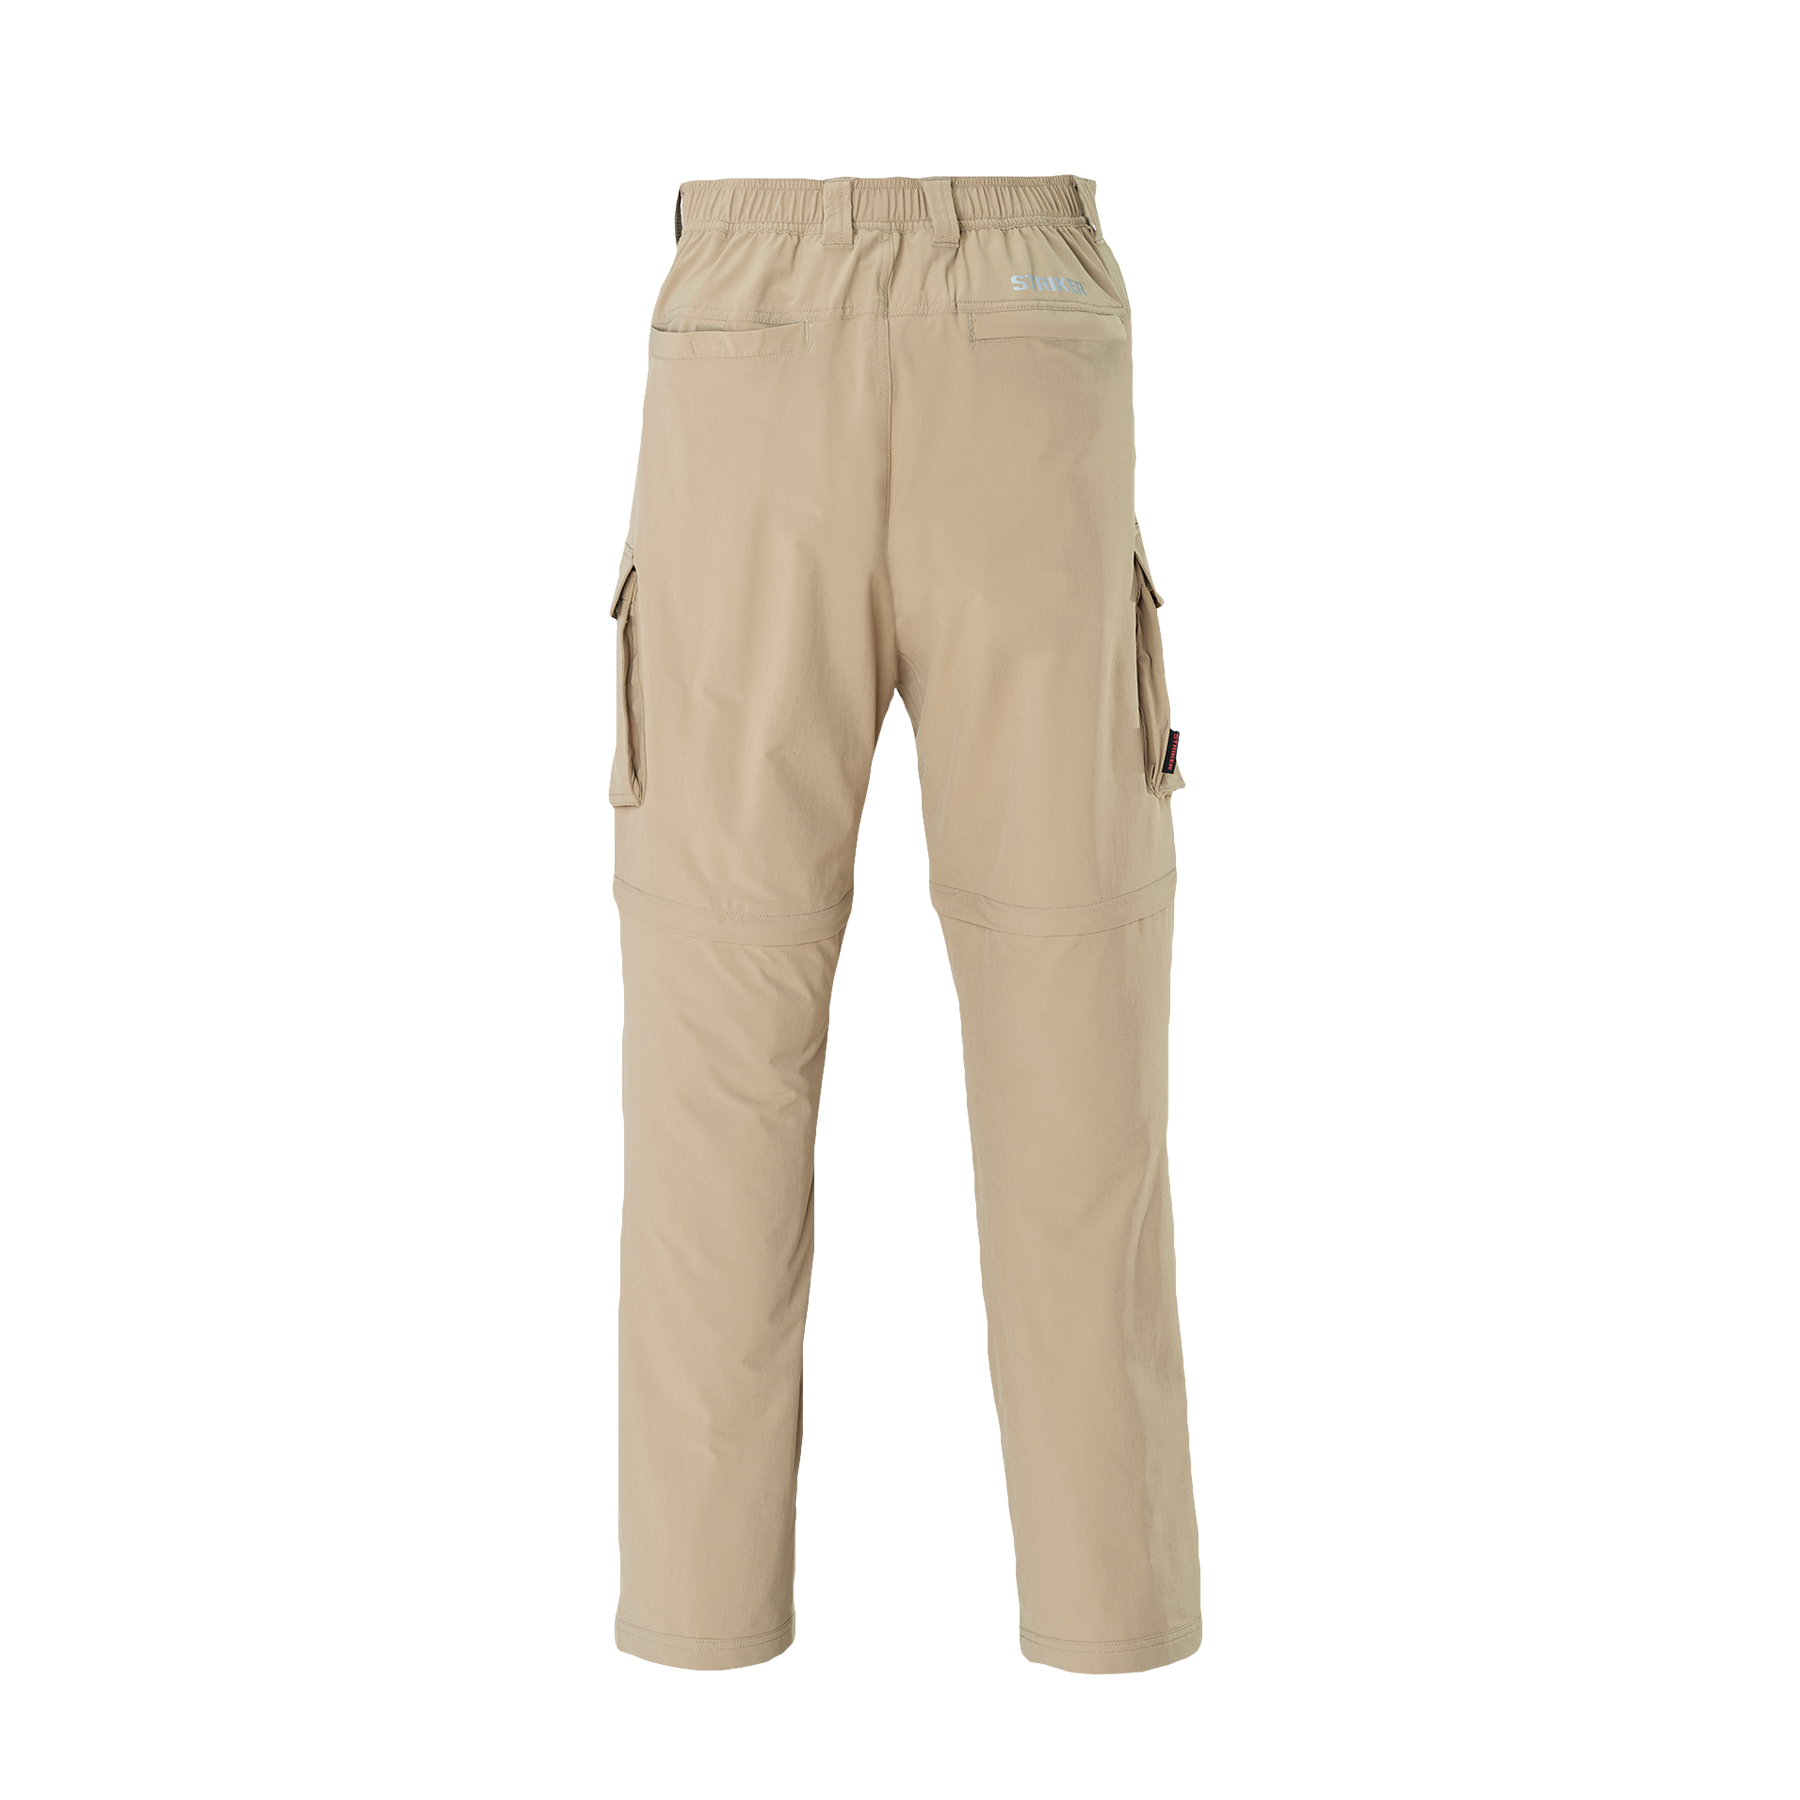 Barrier Pant - All Seasons Sports